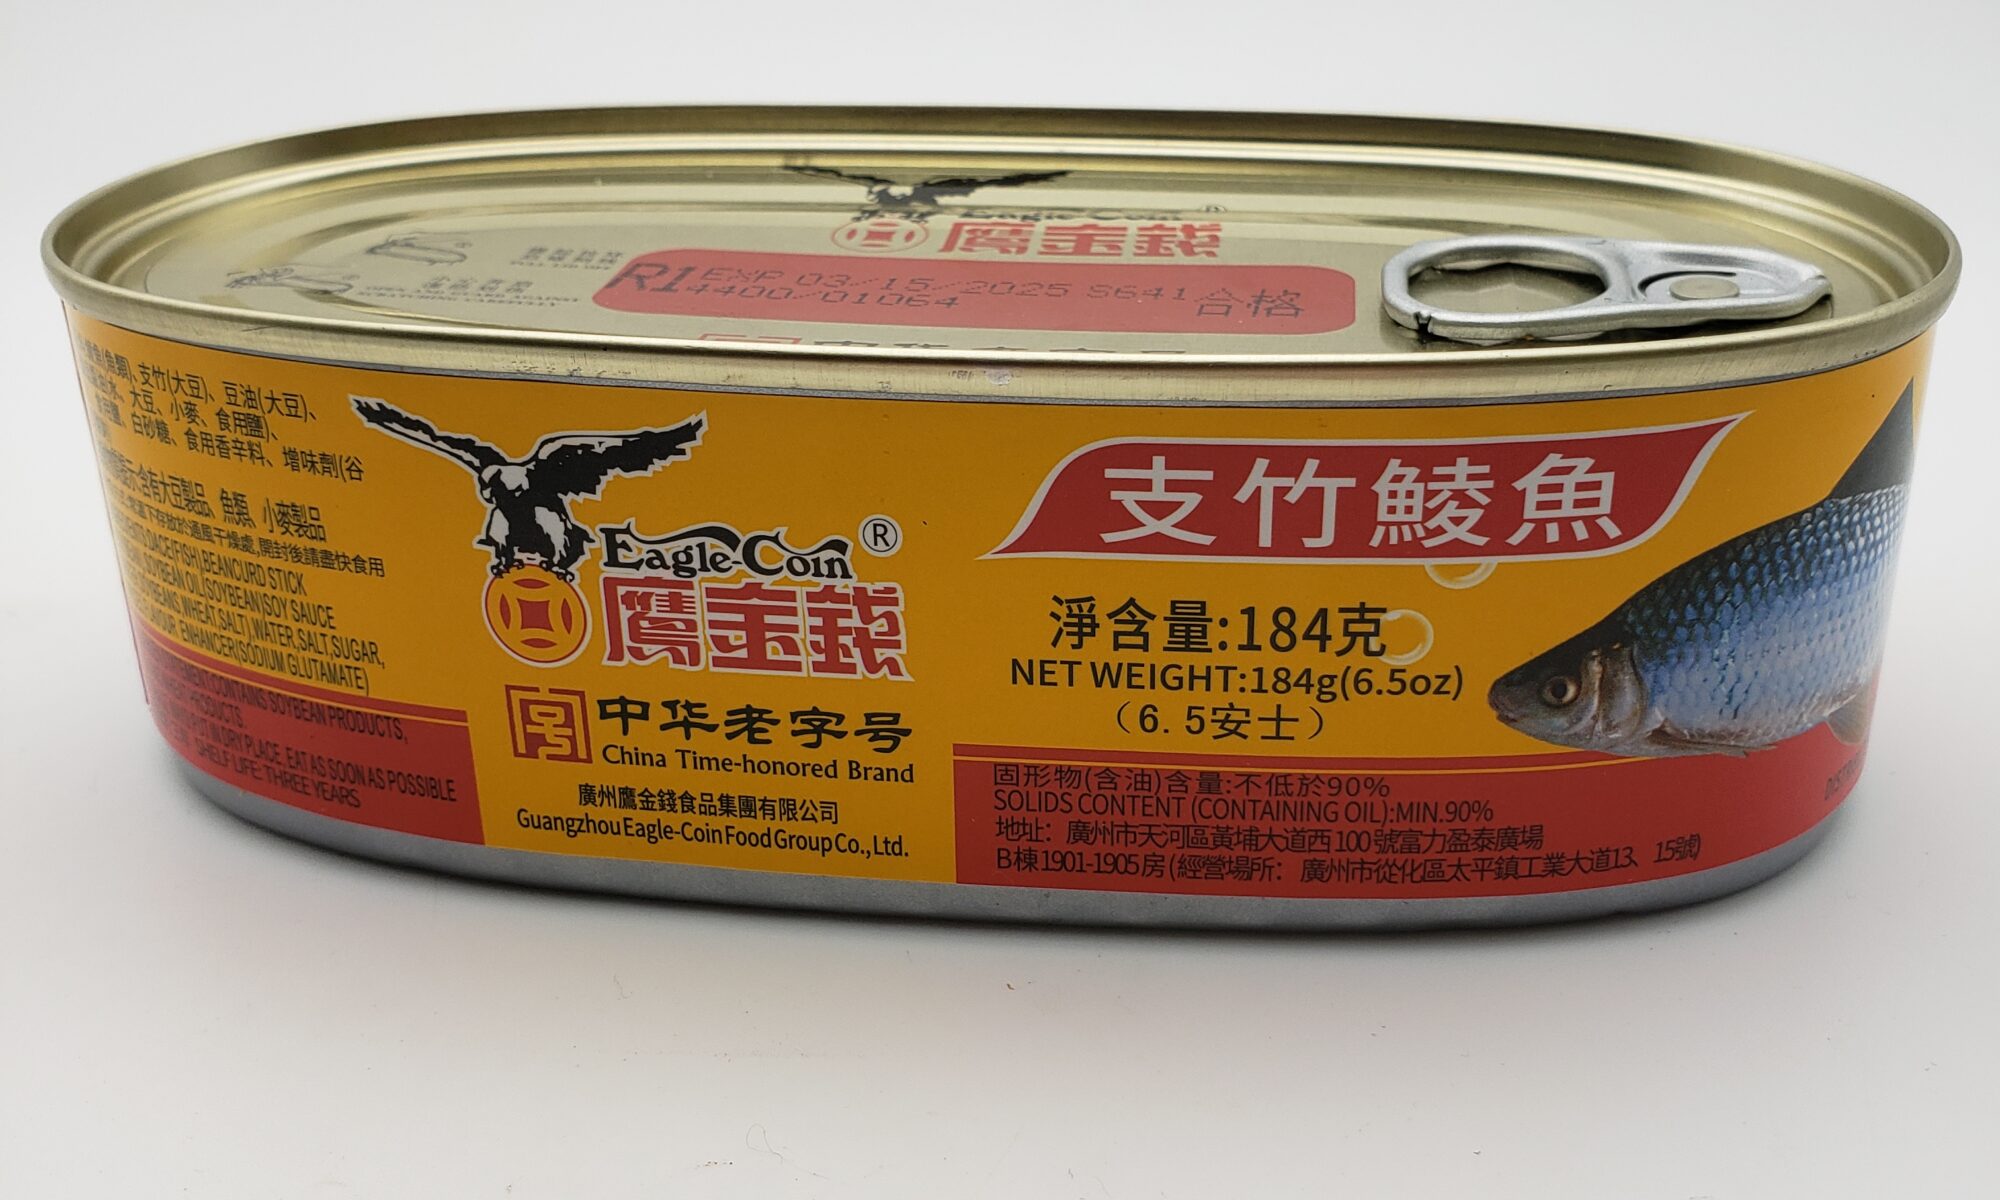 Image of Eagle Coin fried dace with fermented bean curd